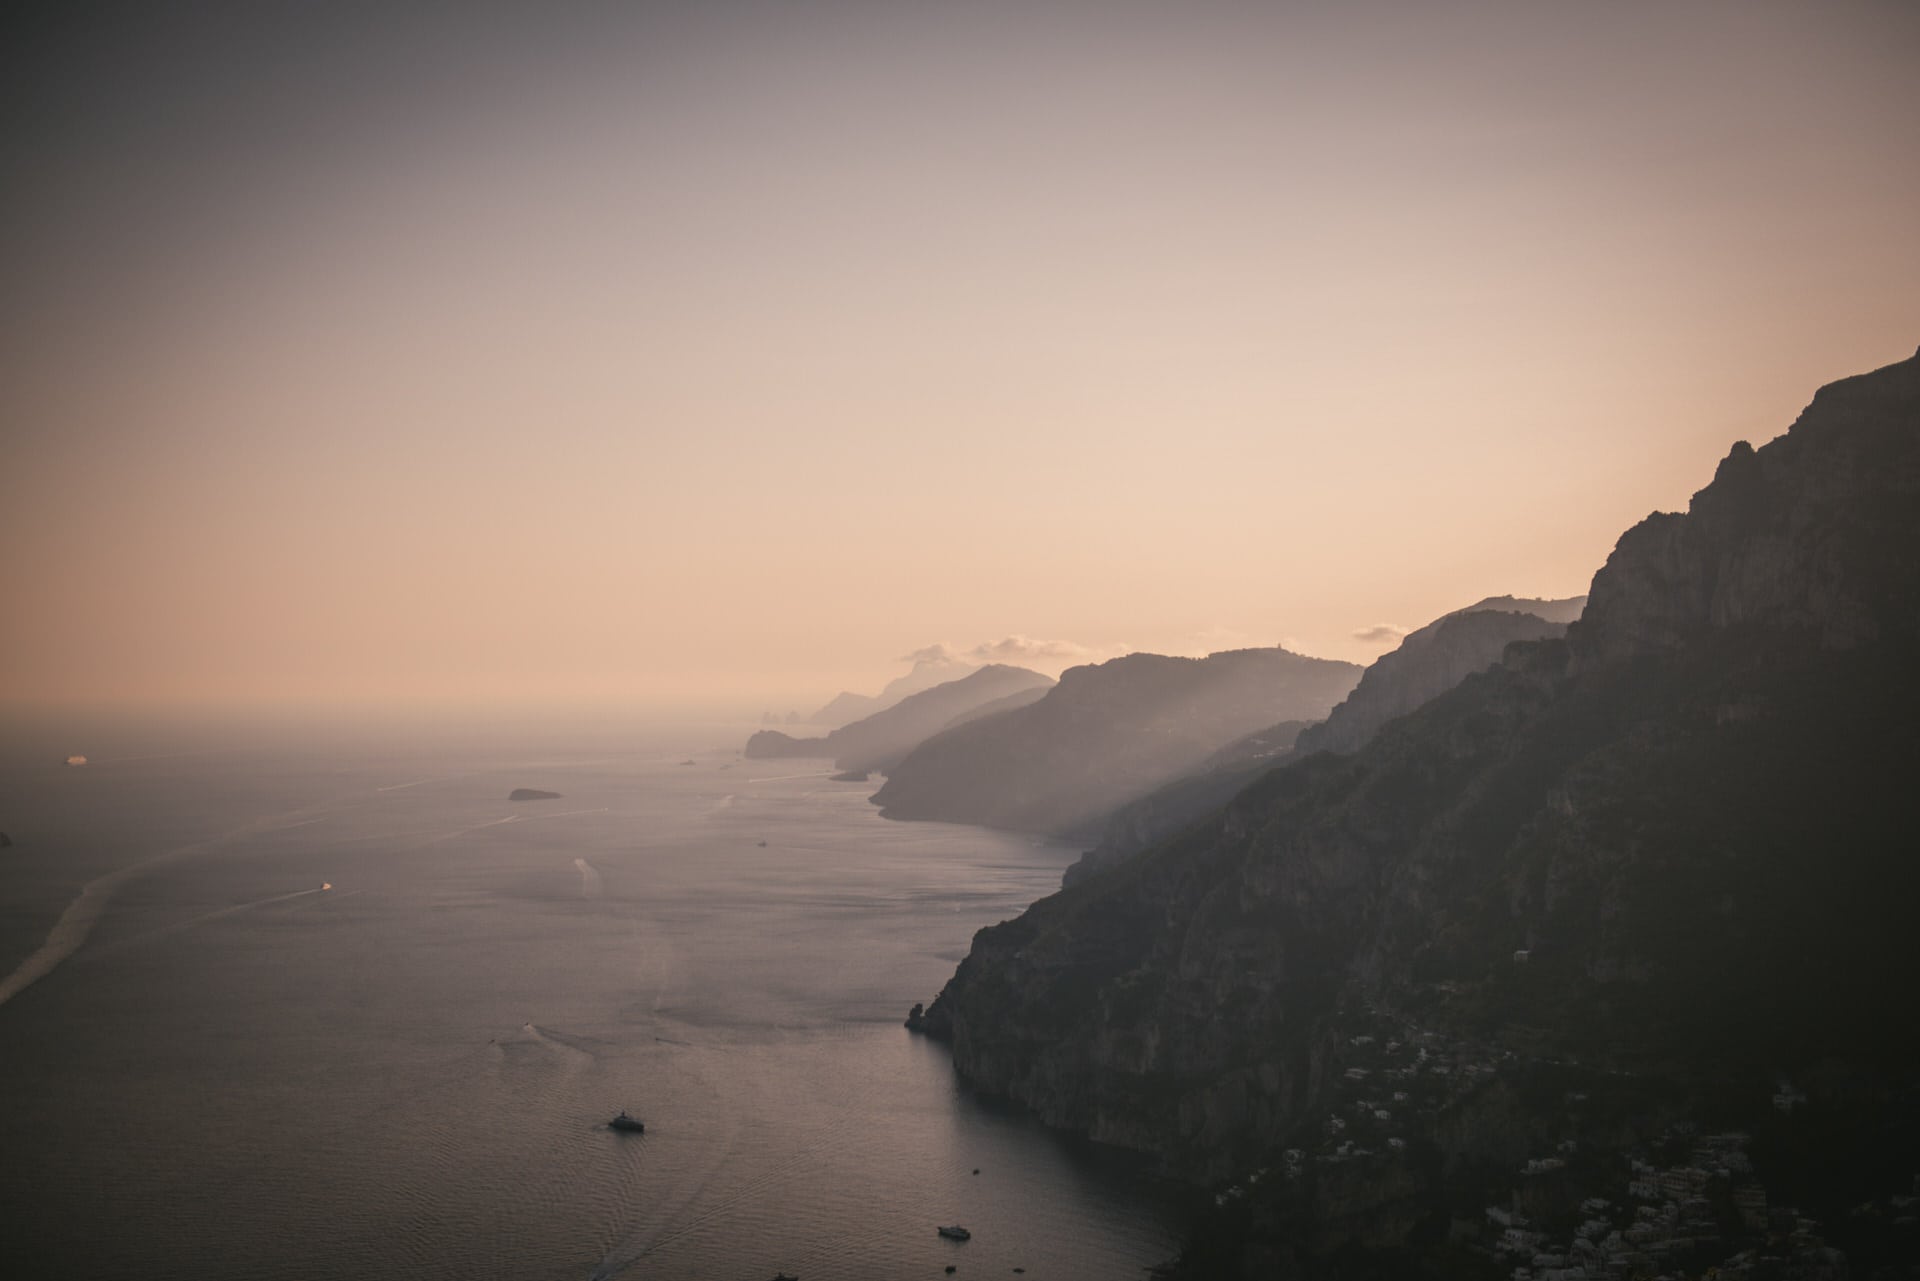 Amalfi Coast and Positano at sunset viewed from Nocelle